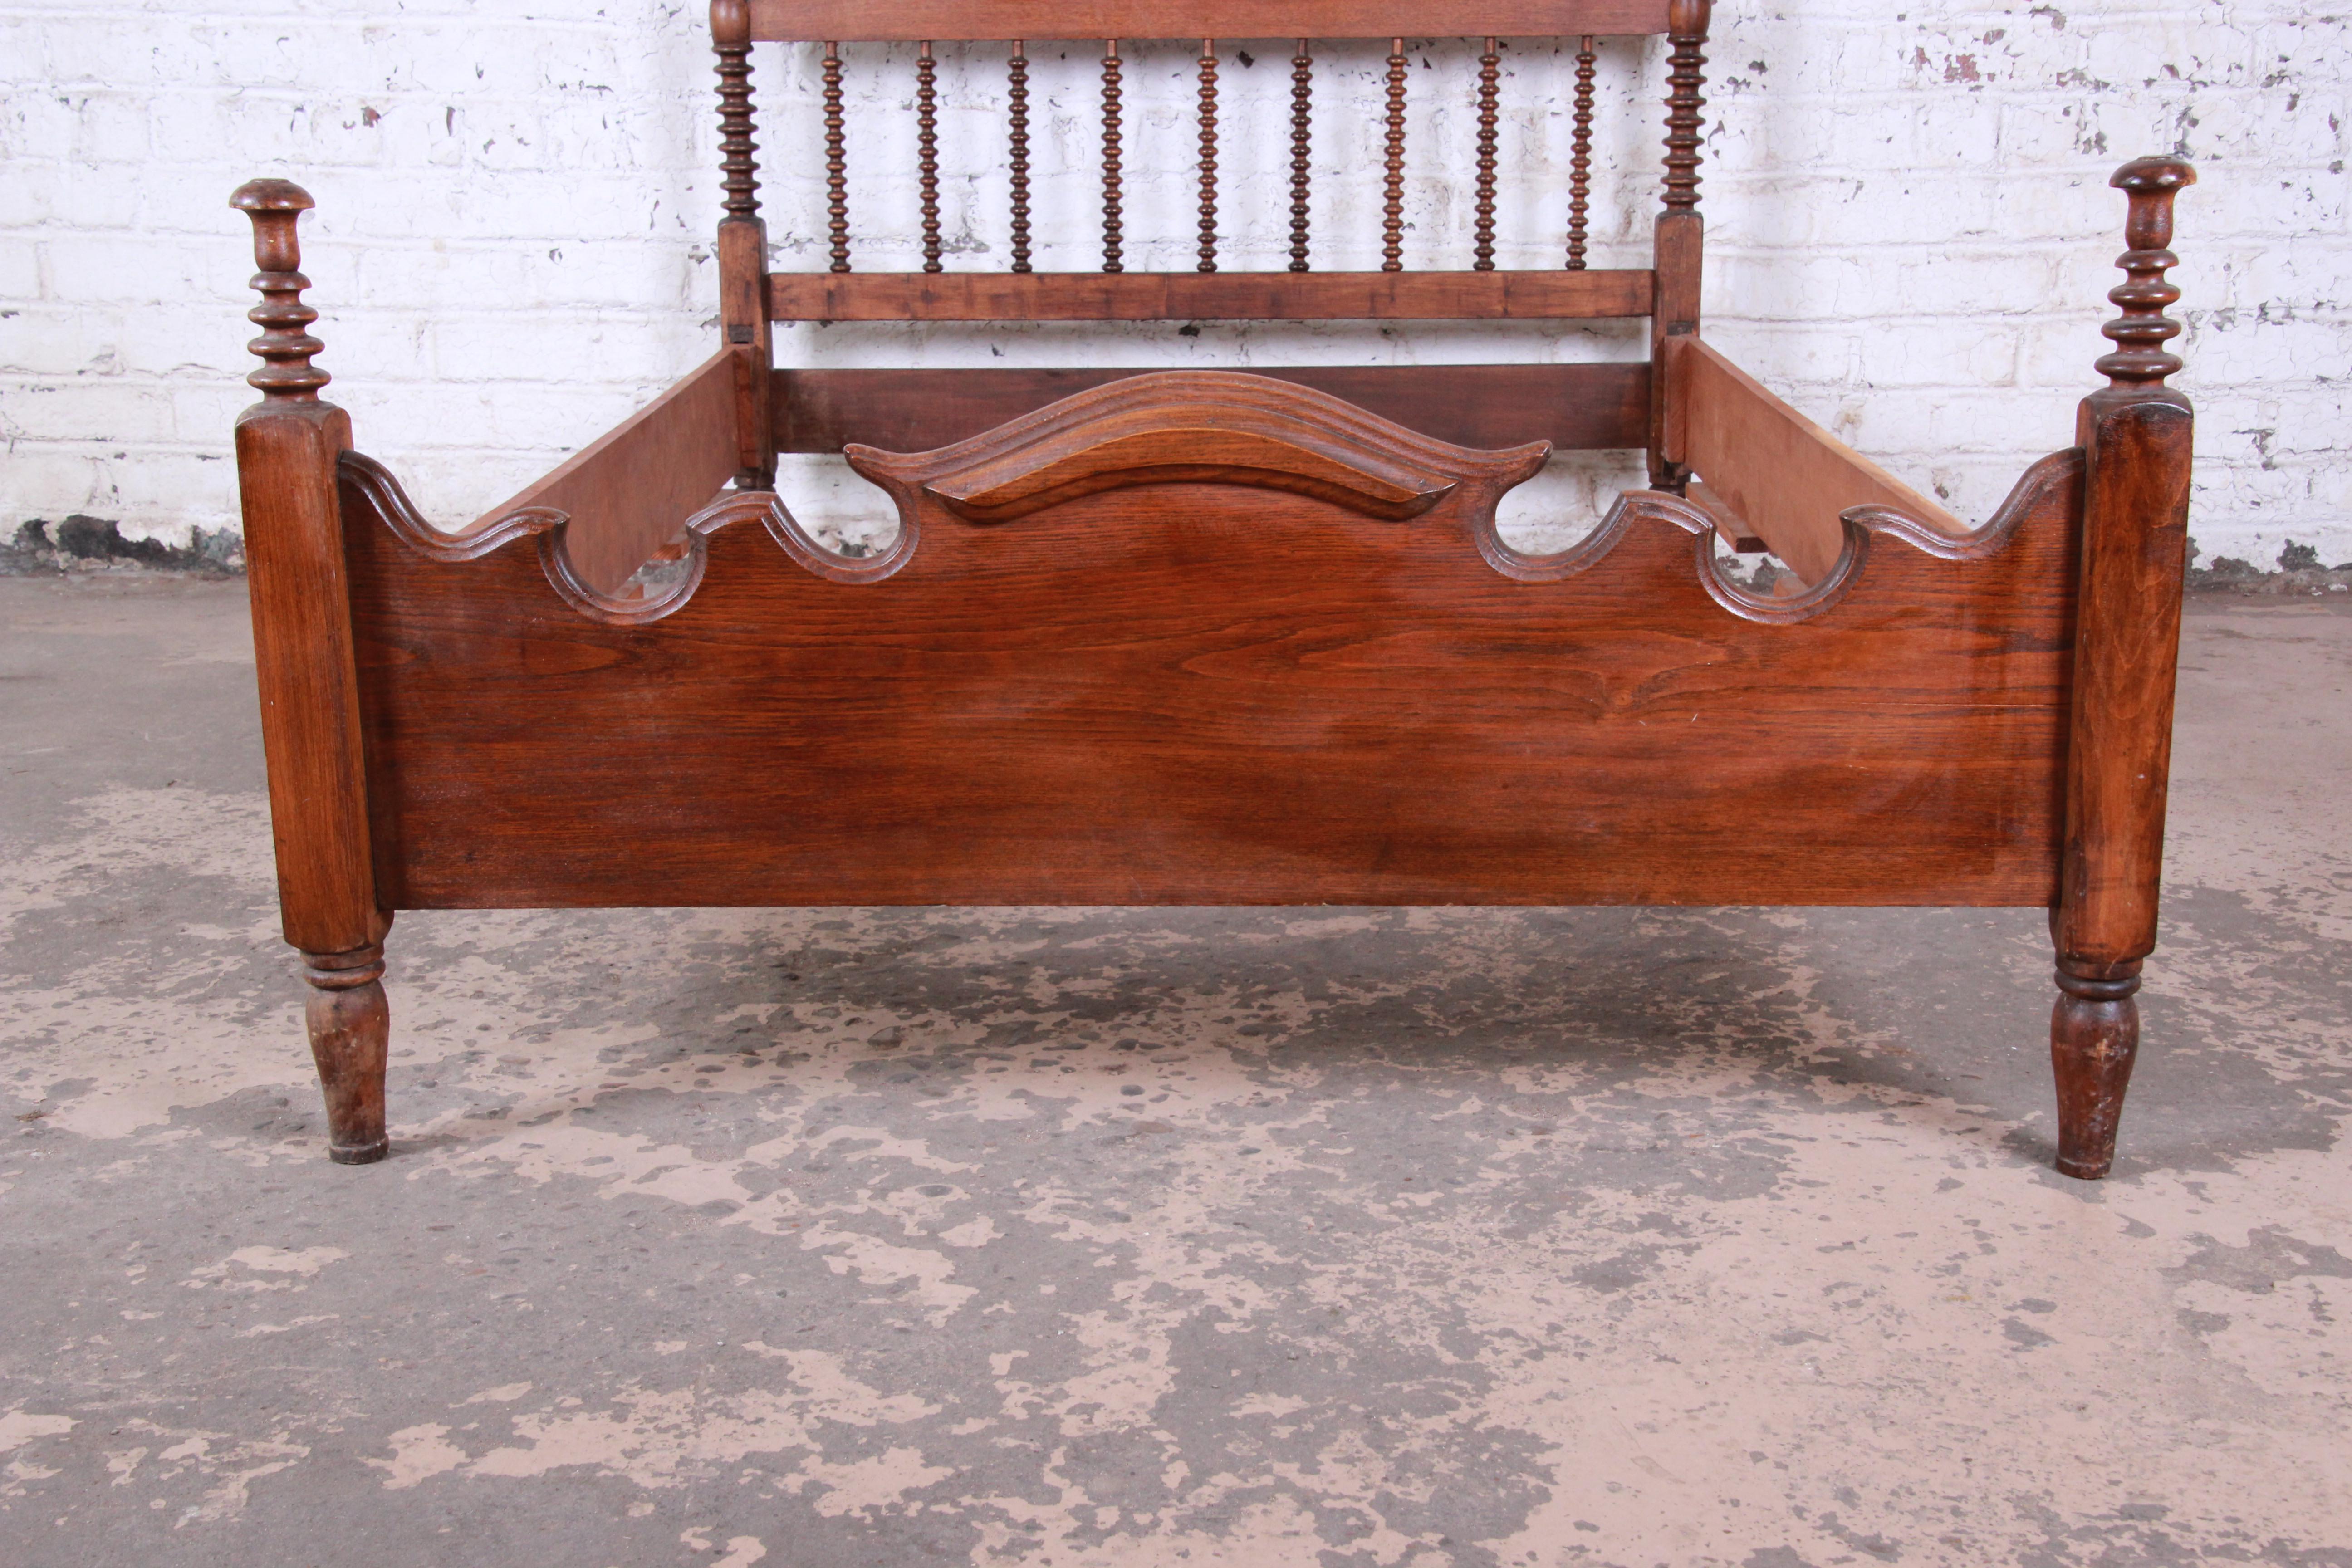 antique spindle beds